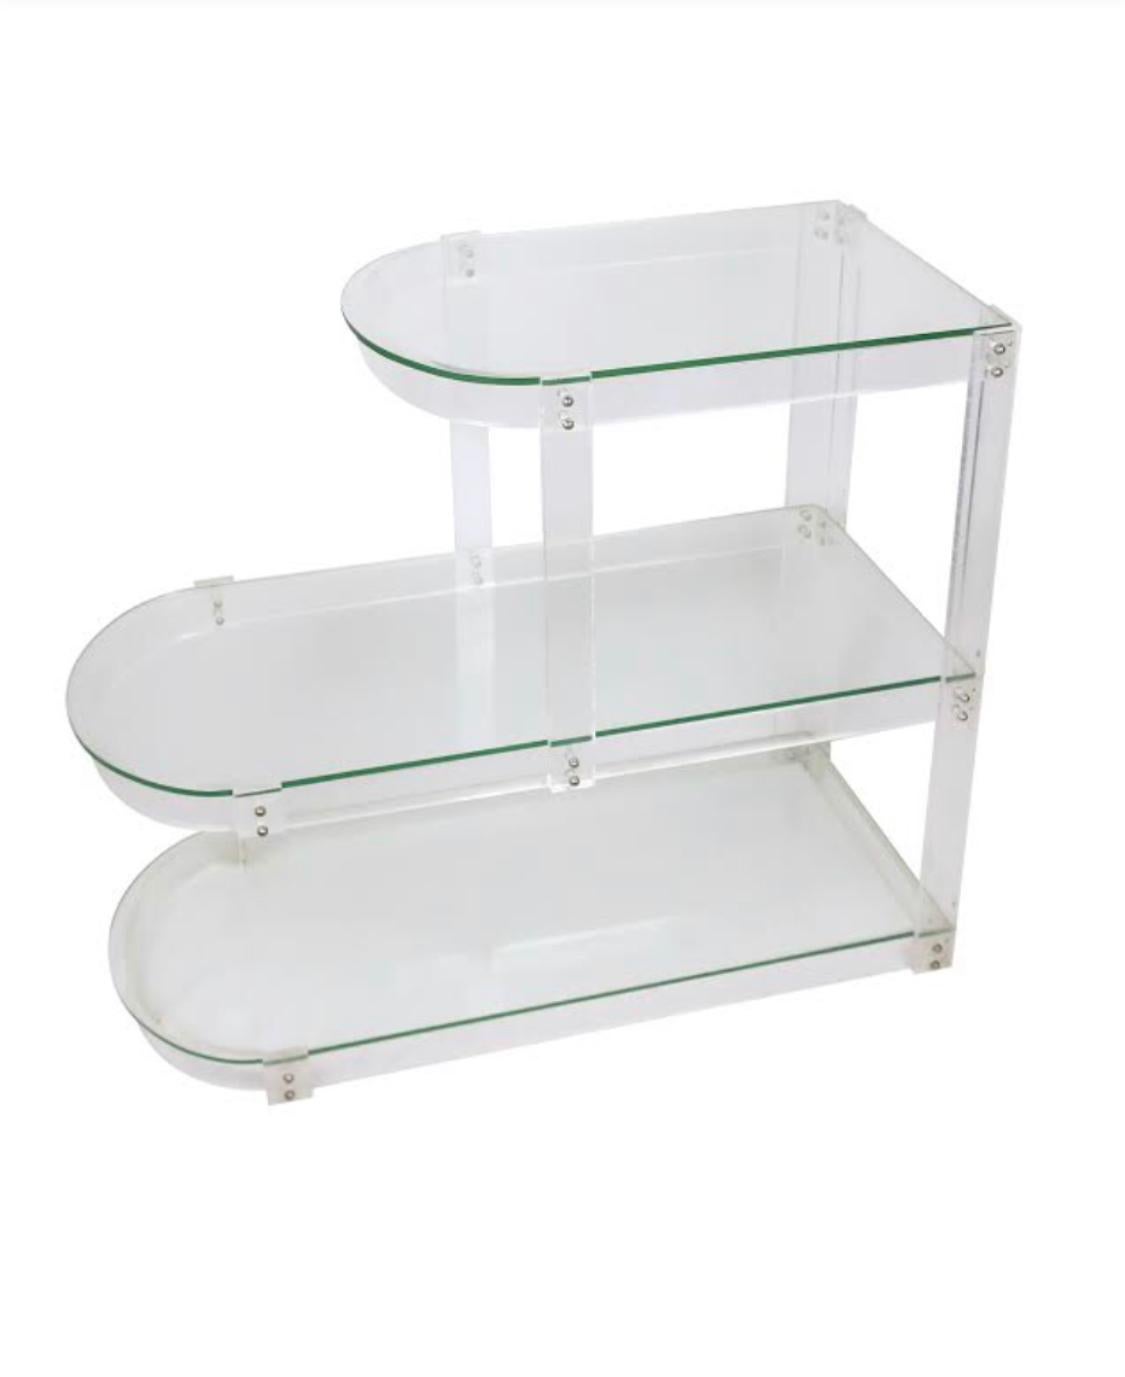 A Mid-Century Modern Lucite and glass shelving unit that is small enough to be used as a side table, bookshelf, bar, or even a console table. In the style of Charles Hollis Jones.

In excellent vintage condition. Unsigned.

Measures: 13” x 29” x